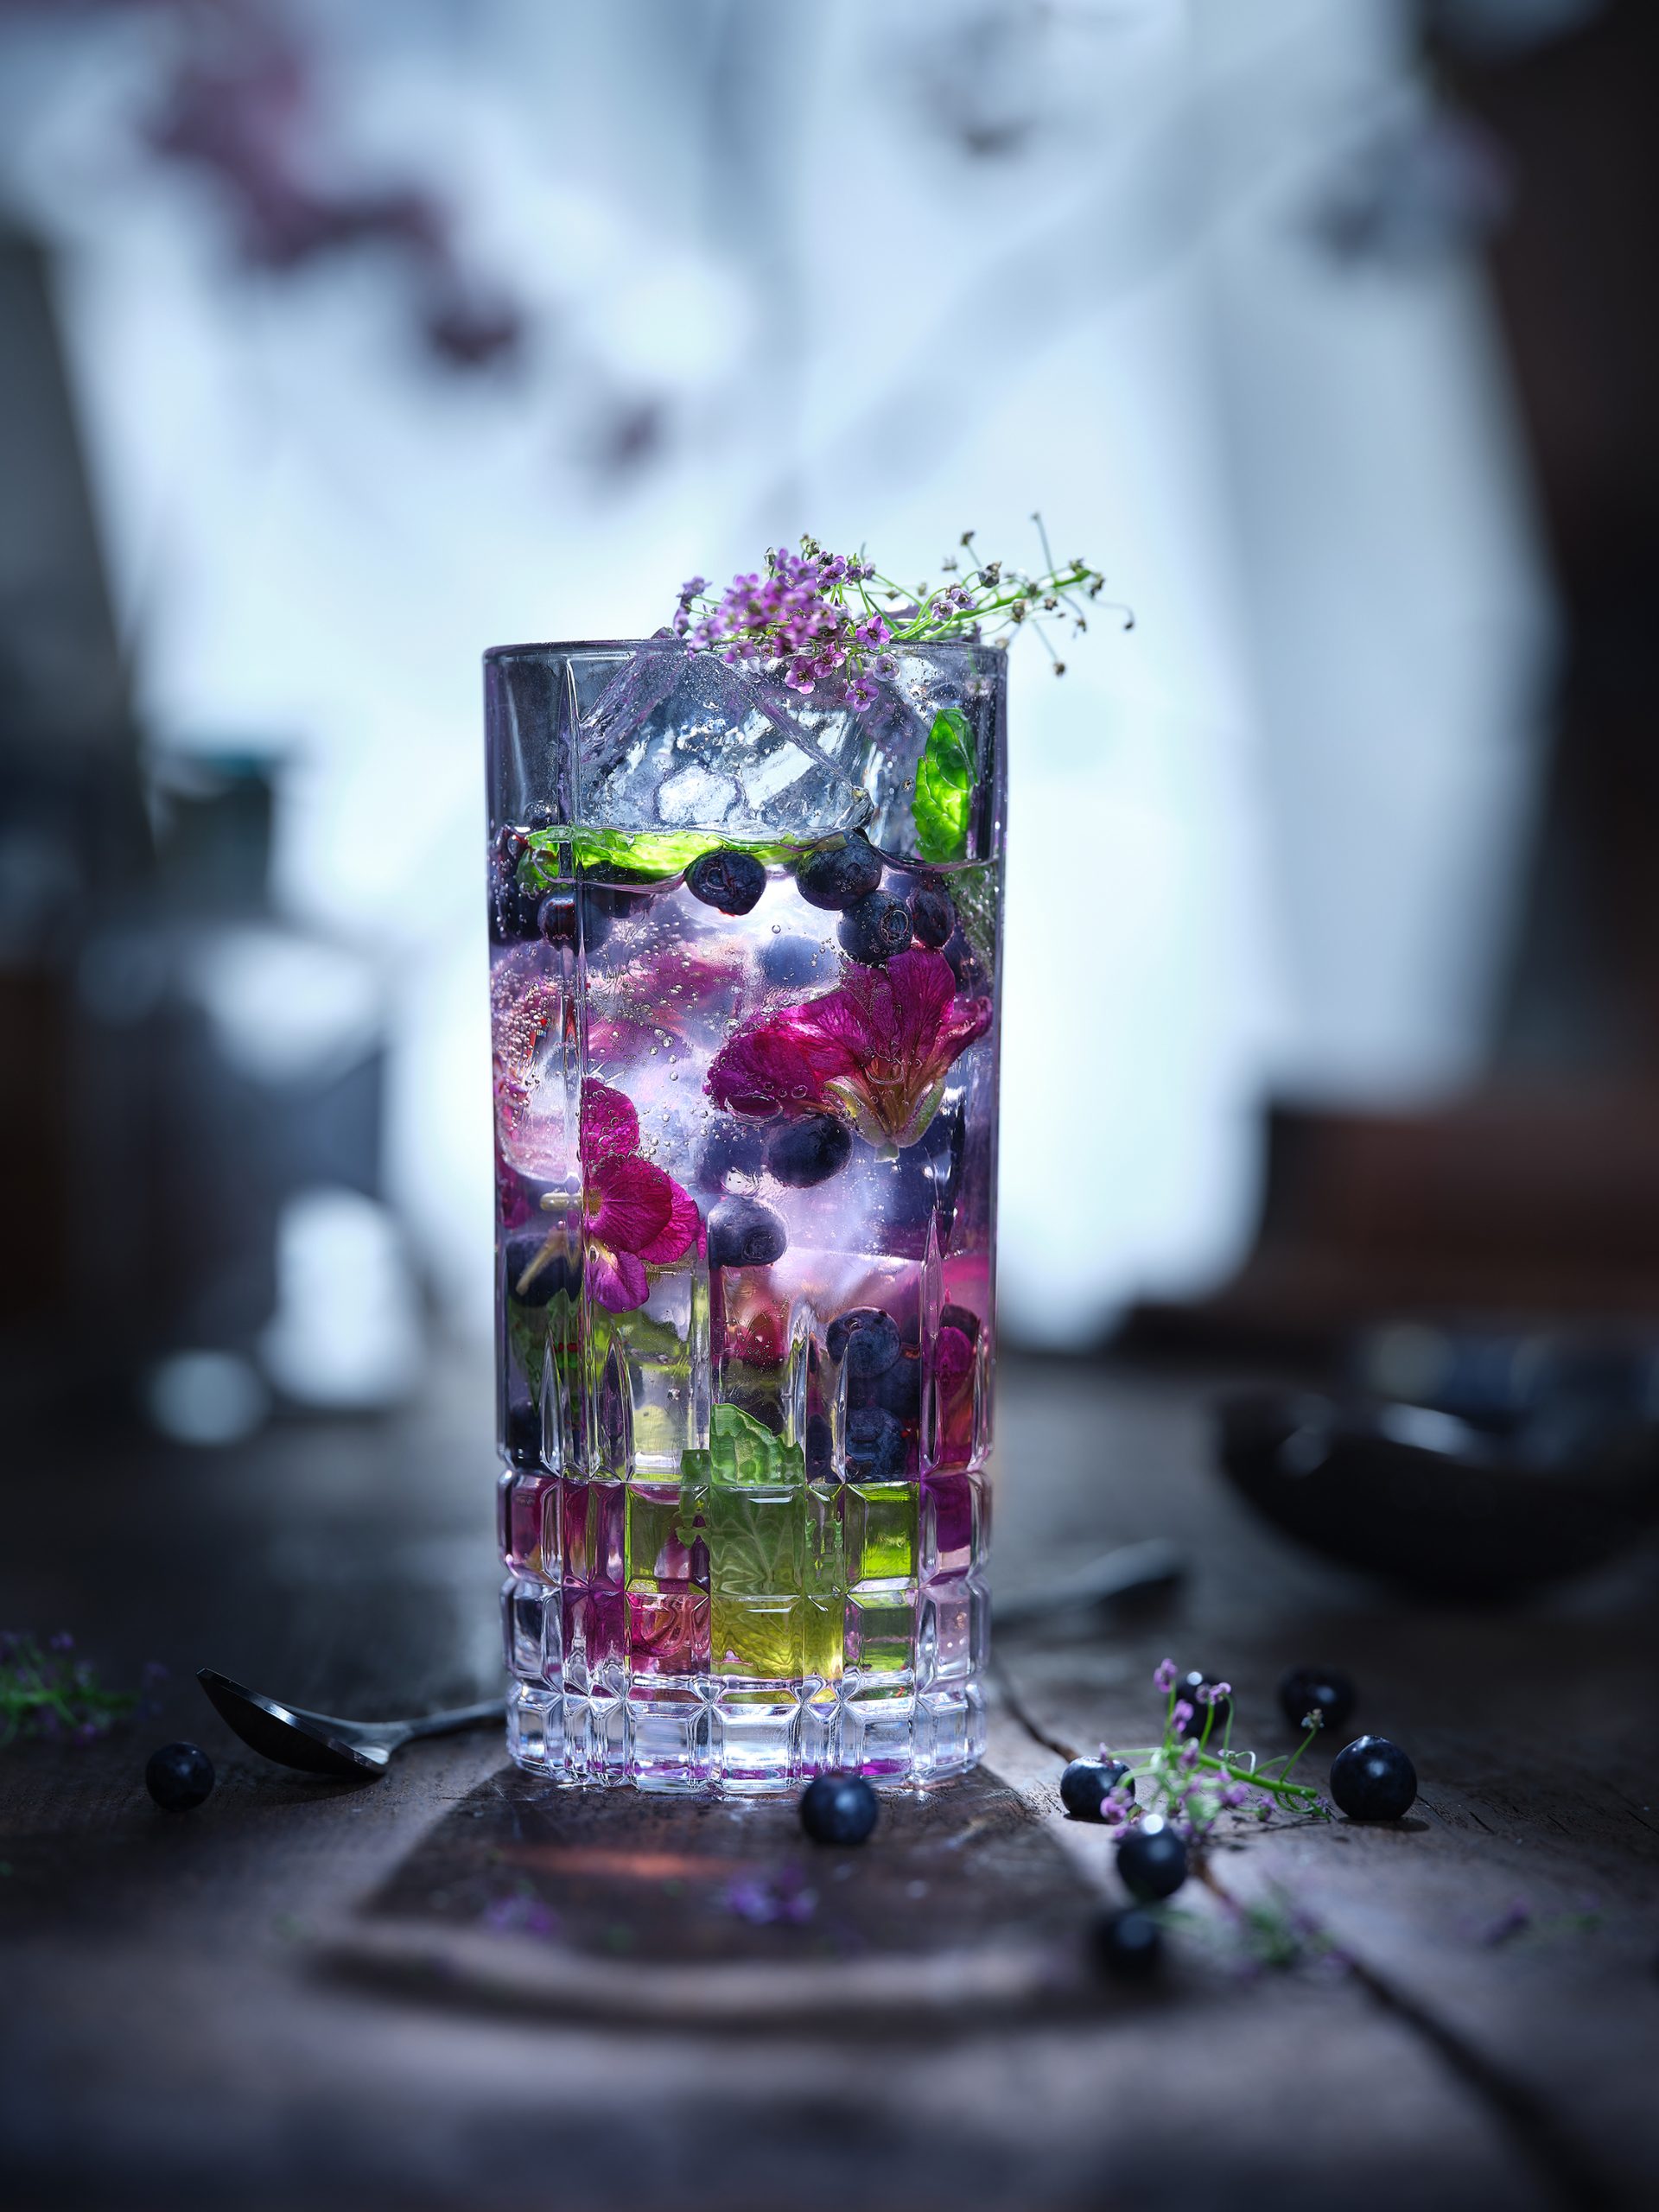 A blueberry gin and tonic cocktail stands in a bar environment. The background is very blurred.